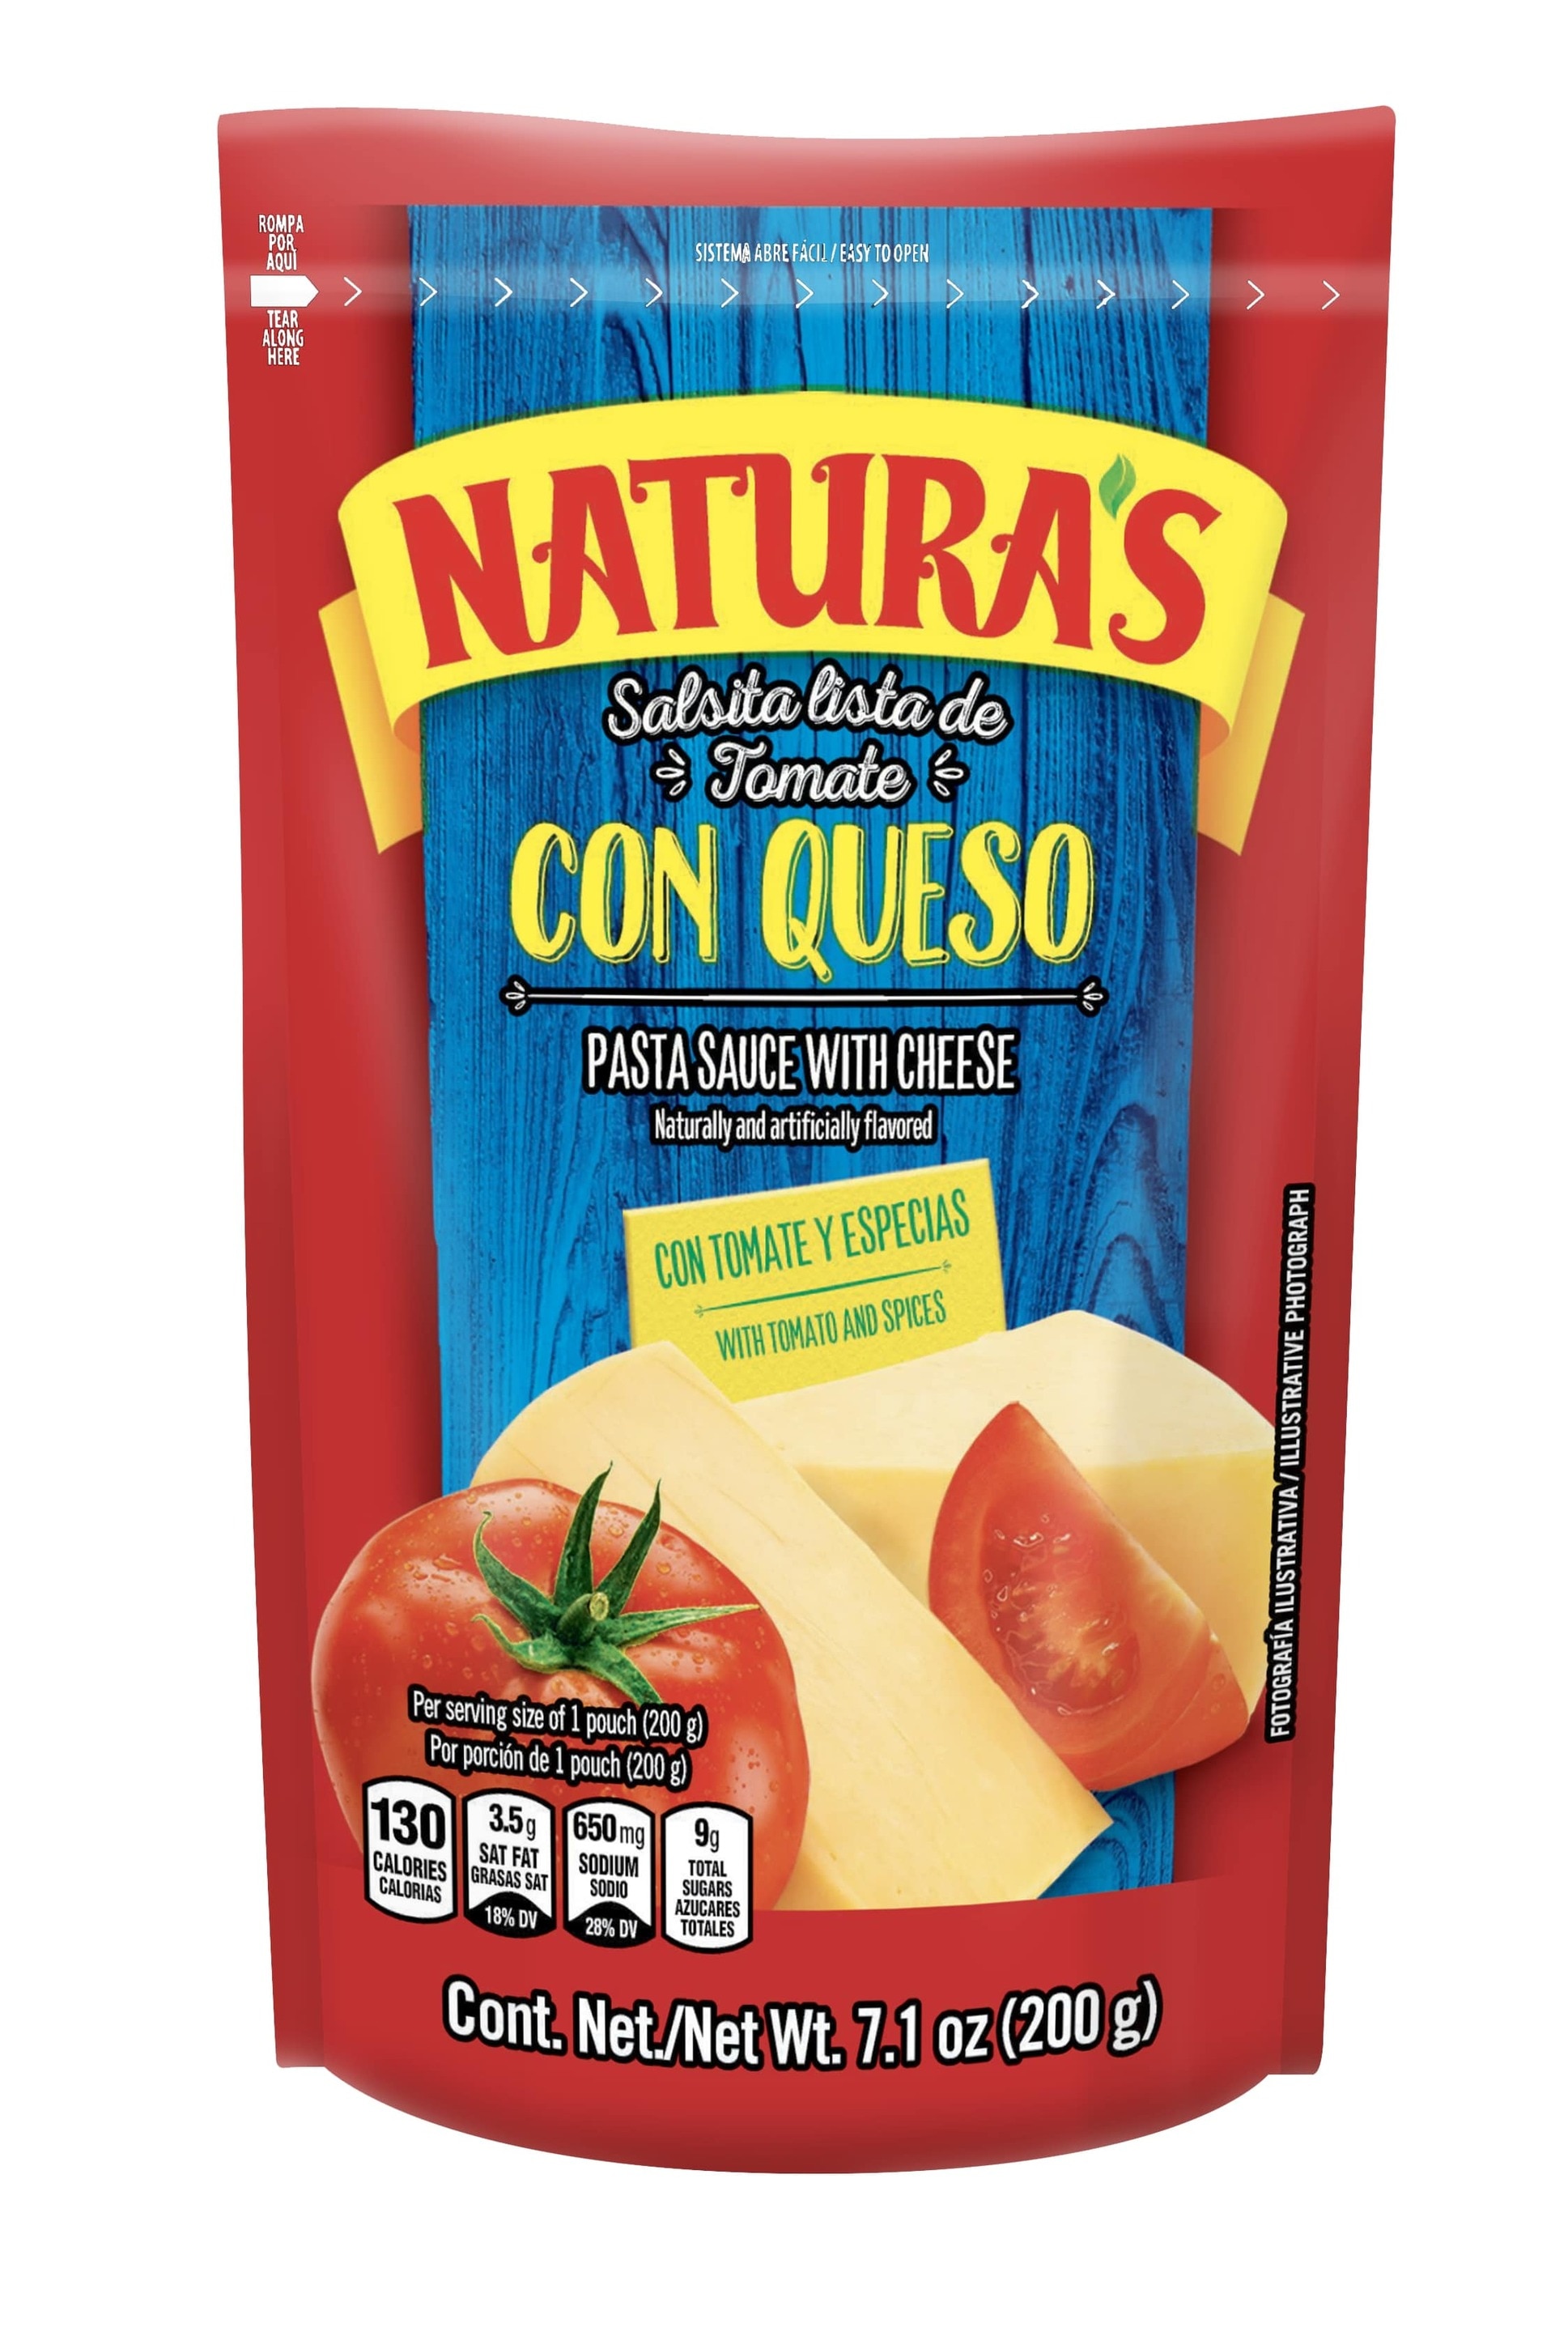 Naturas Salistalistade Tomate Con Queso packshot